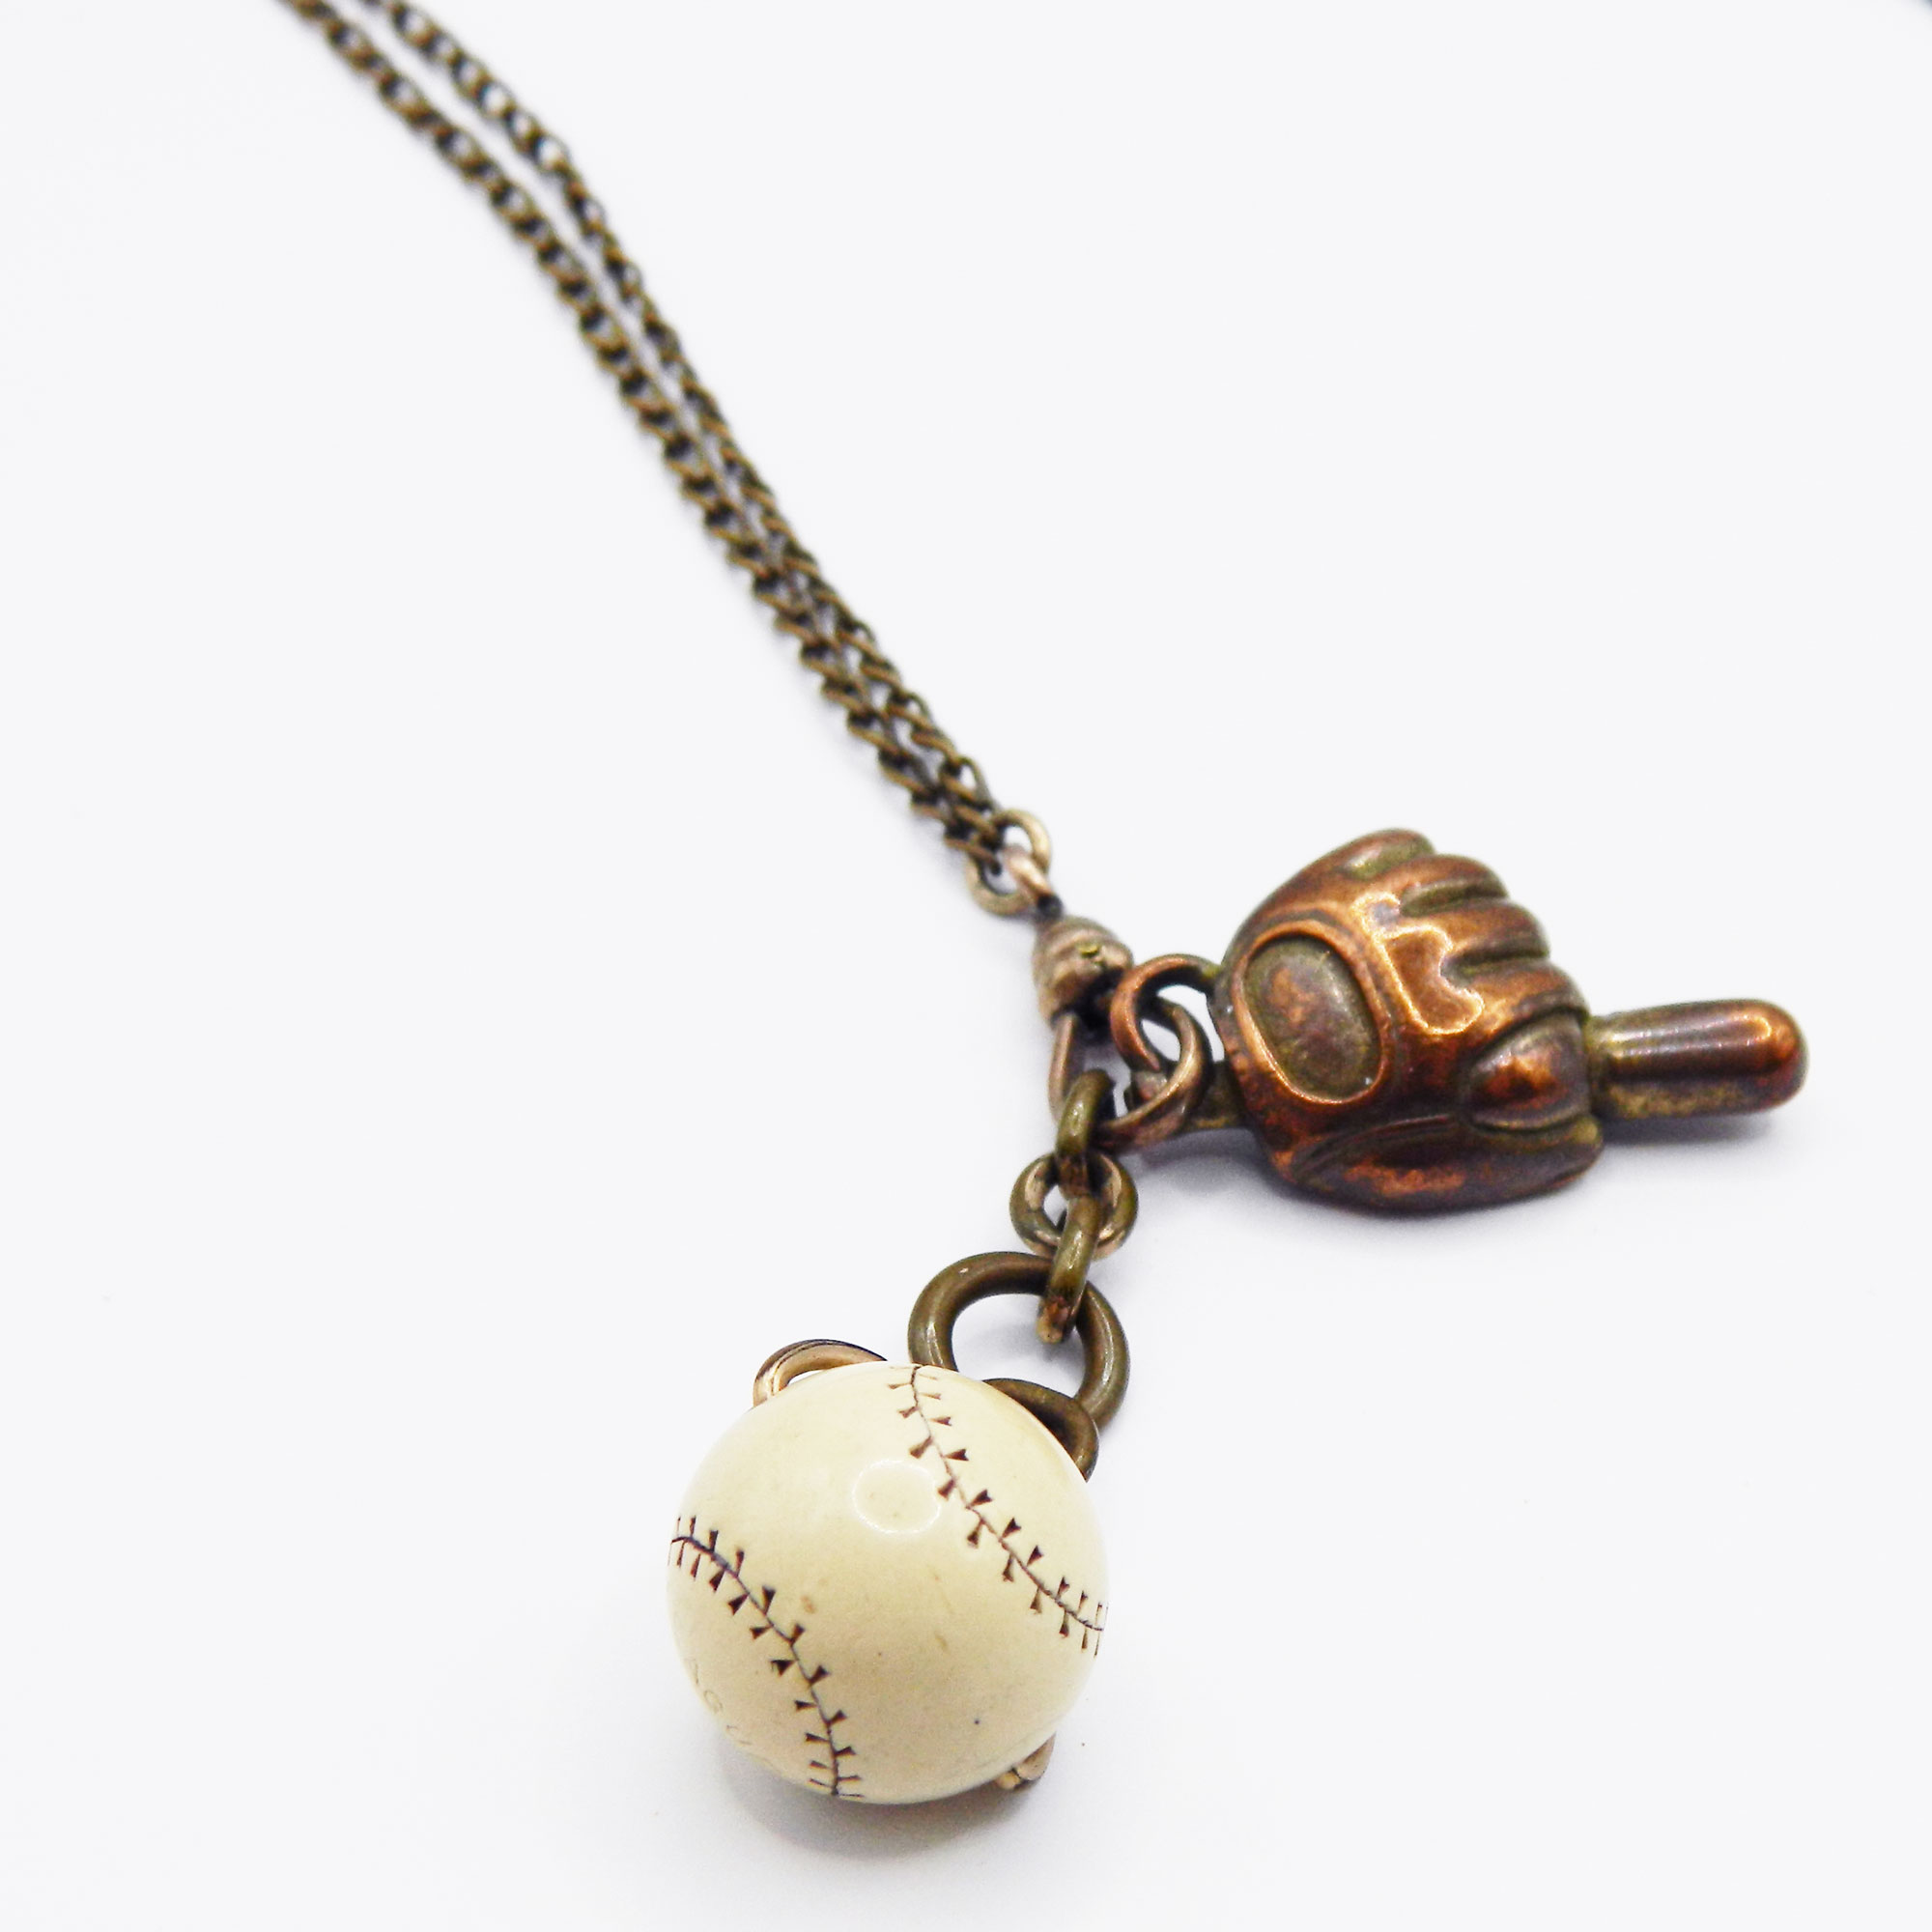 Antique Baseball watch fobs and chain